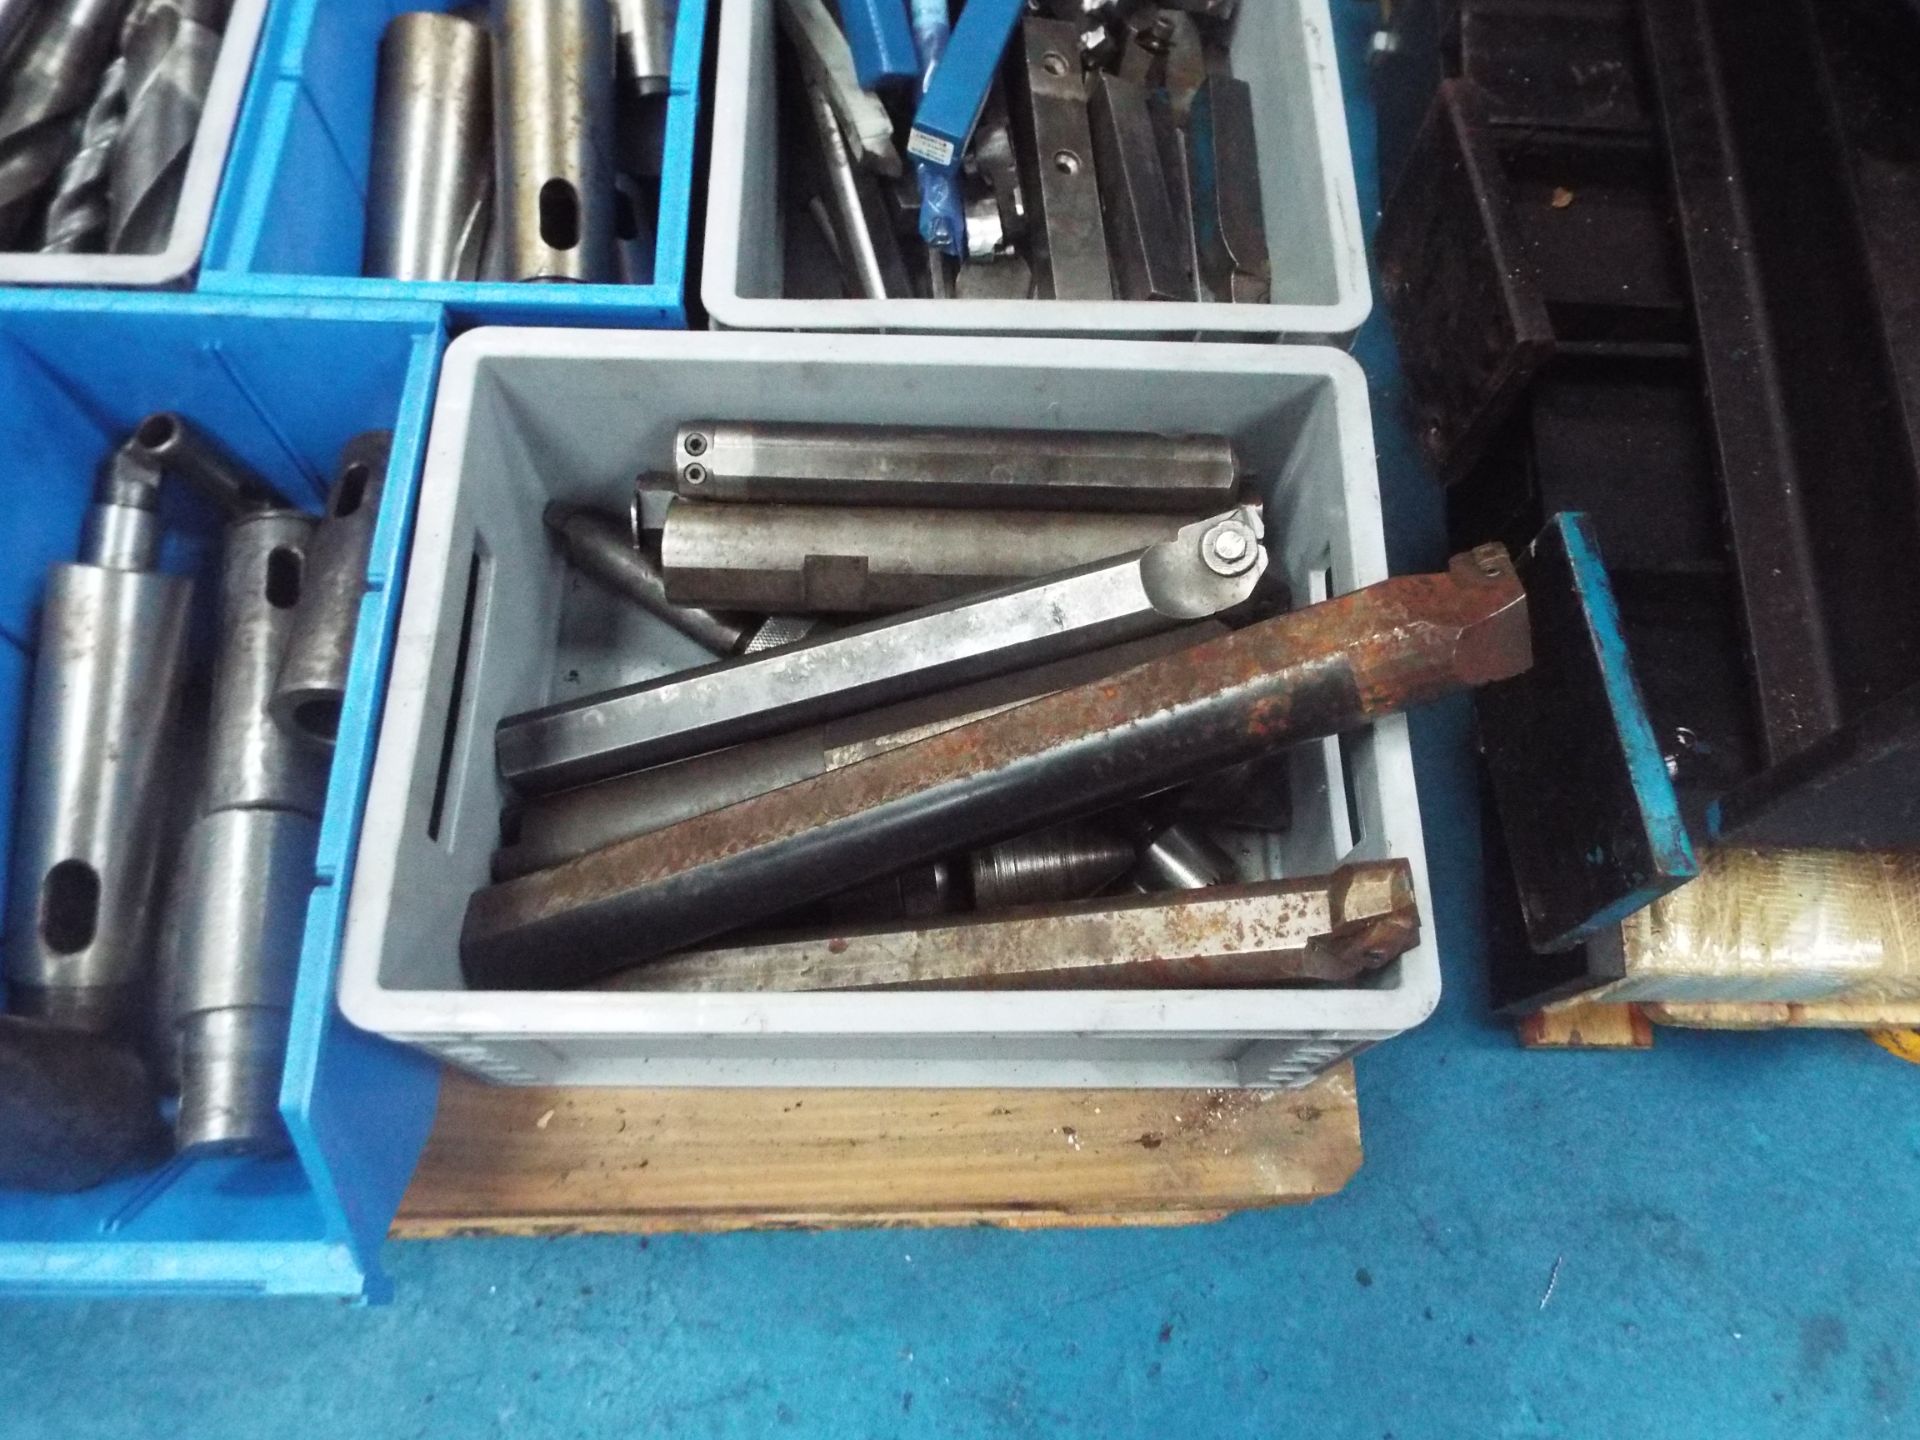 Miscellaneous Tooling Serving Machine Tools From This Auction - Bild 5 aus 7